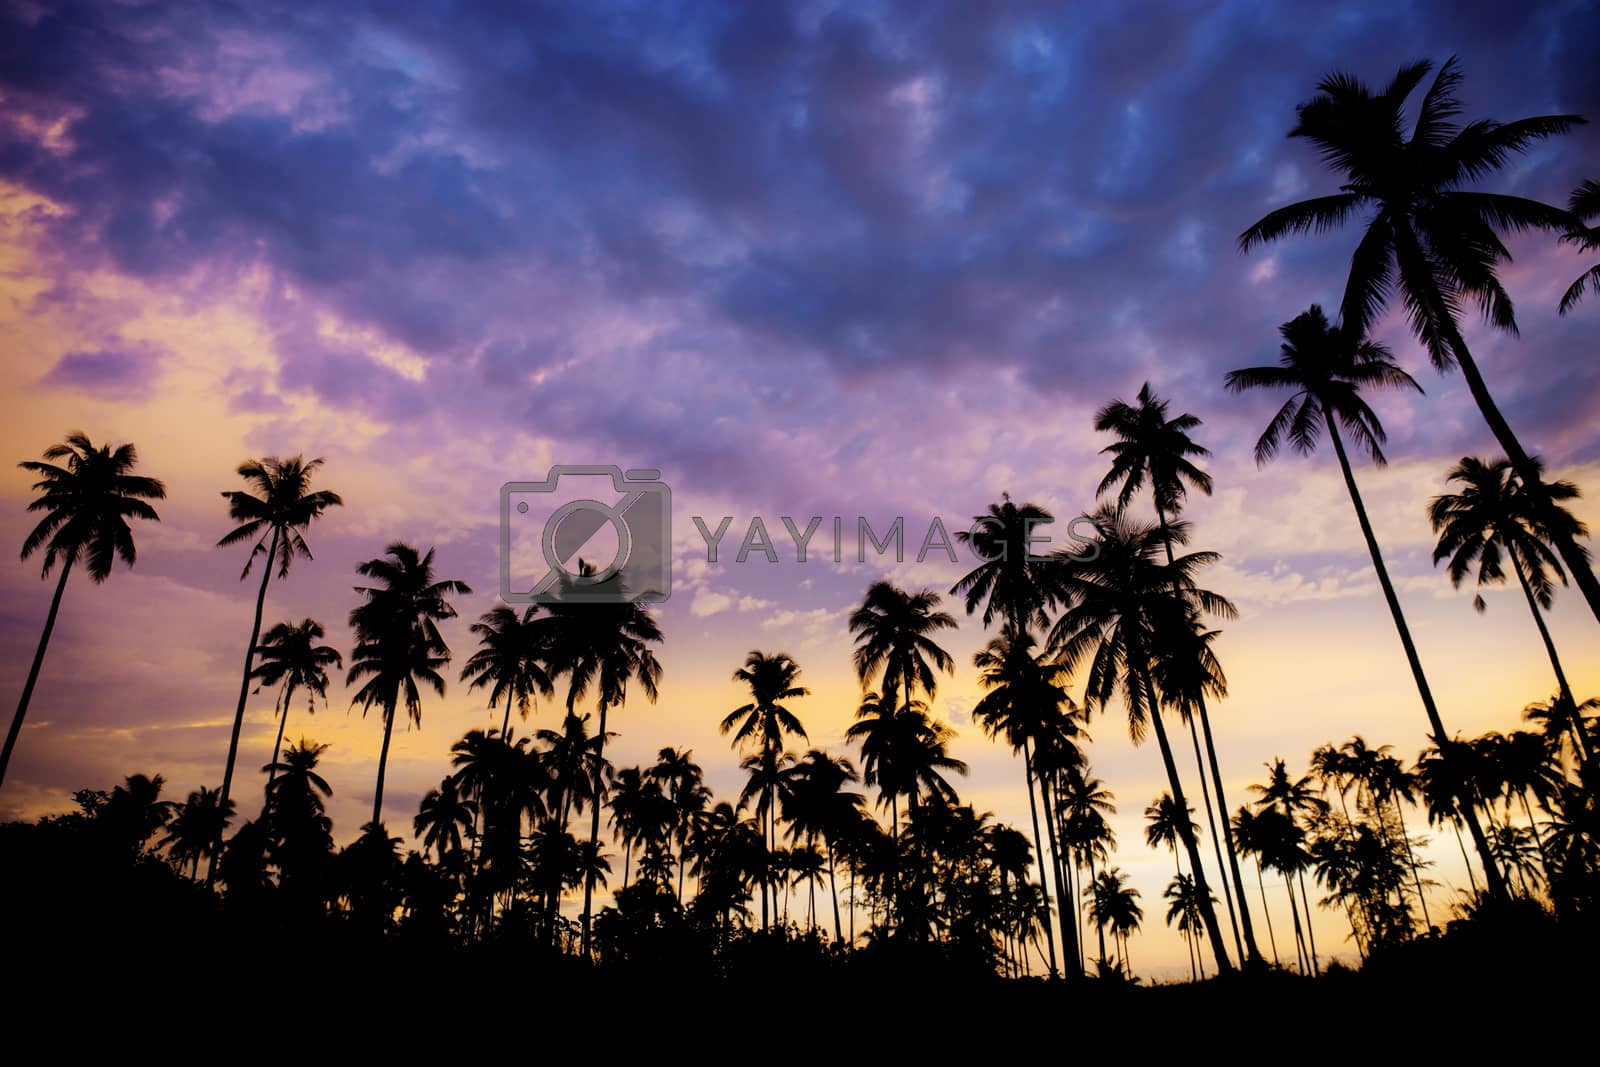 Royalty free image of Palm tree on beach with silhouette. by start08